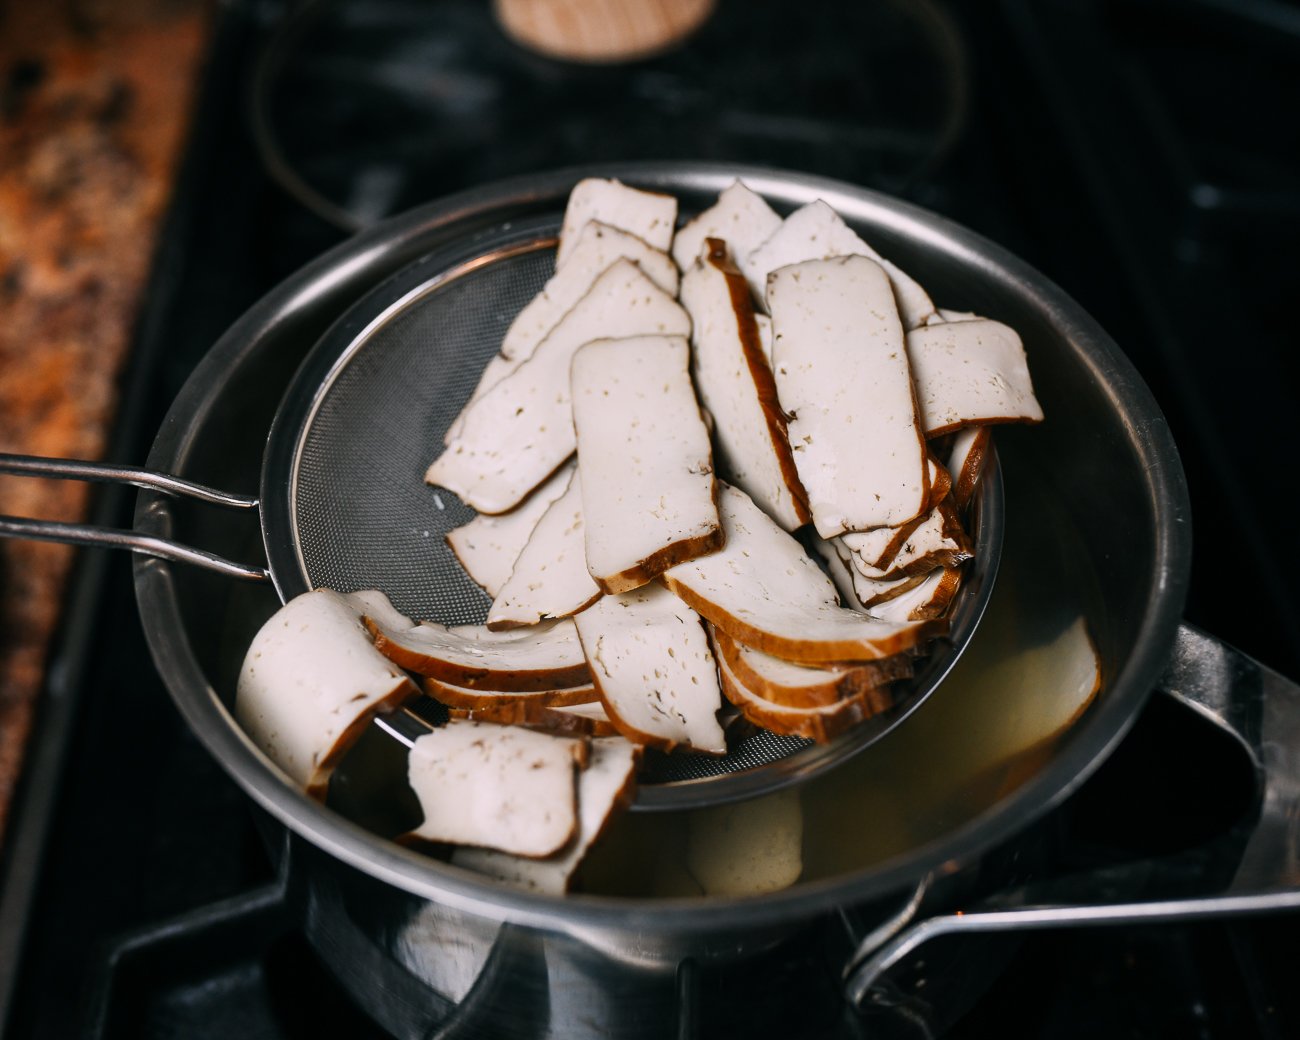 Removing blanched tofu from pot with strainer